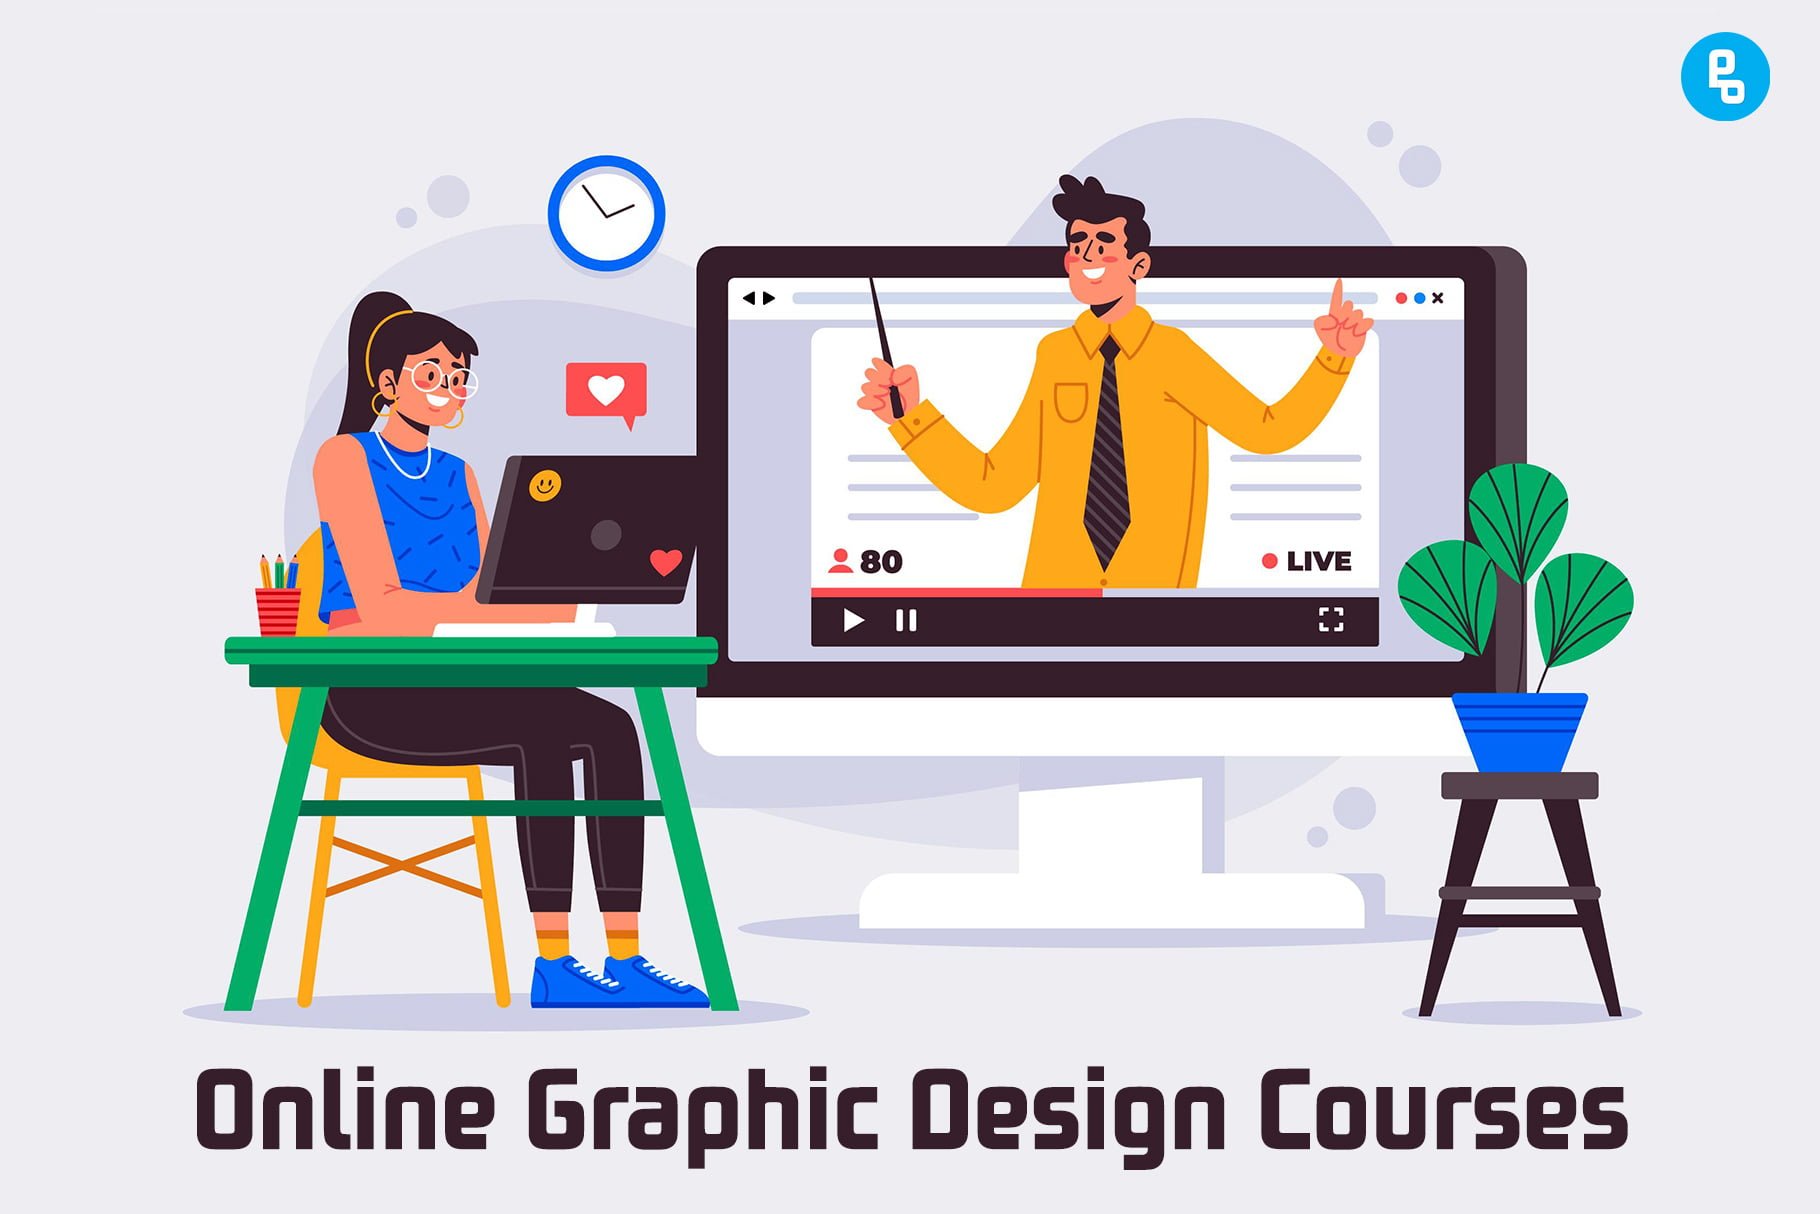 We've scoured the internet and found 12 excellent online graphic design courses that will help you launch a new career in graphic design or just produce better designs for your clients.